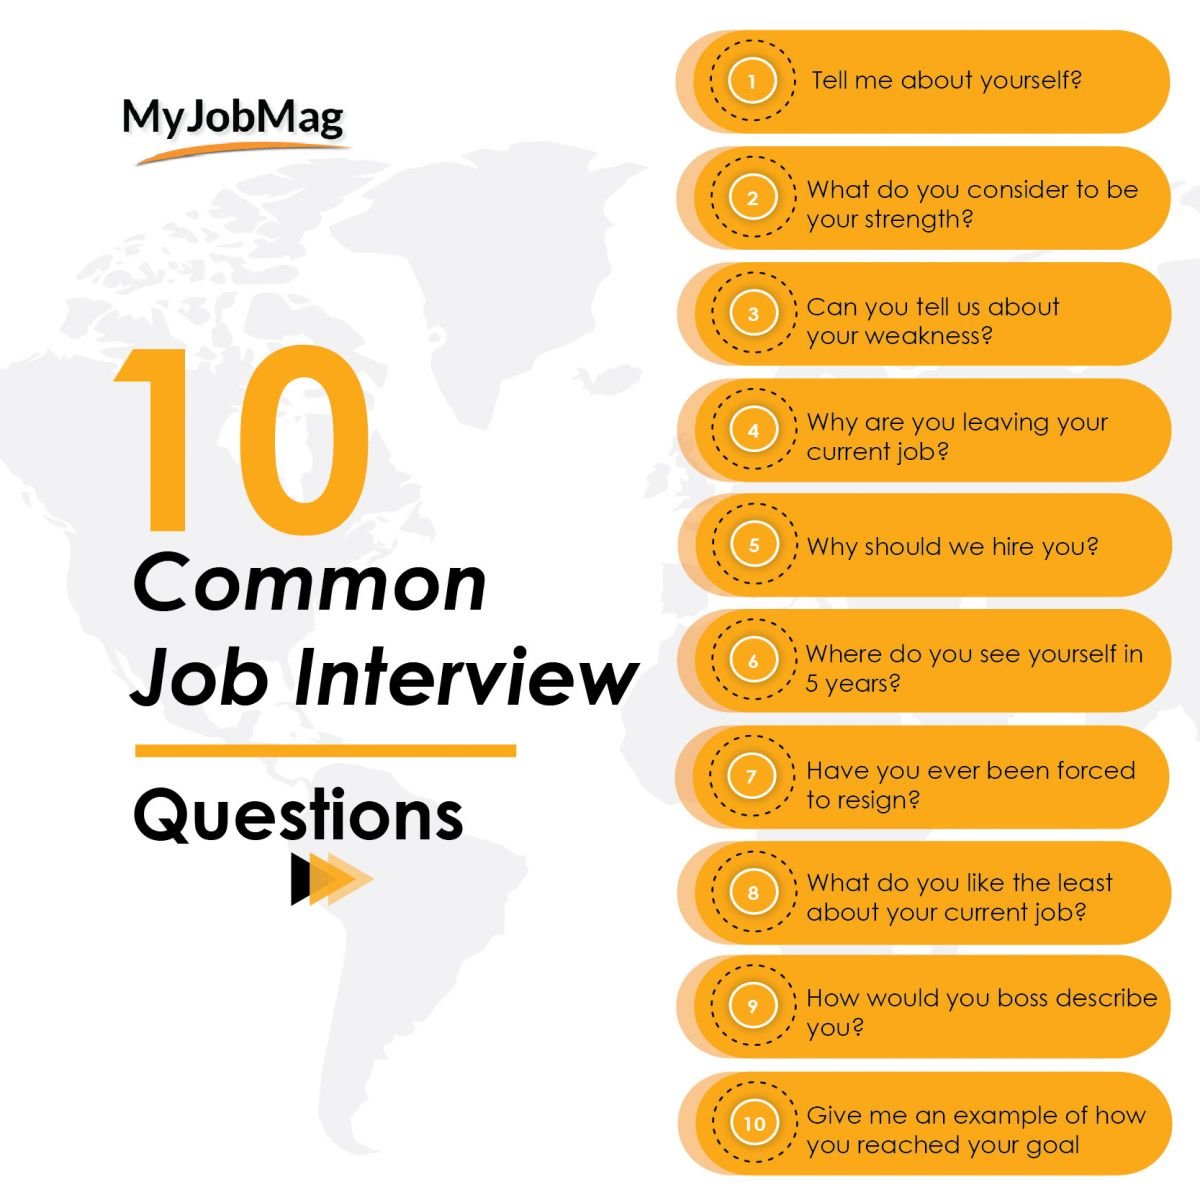 interview questions and answers